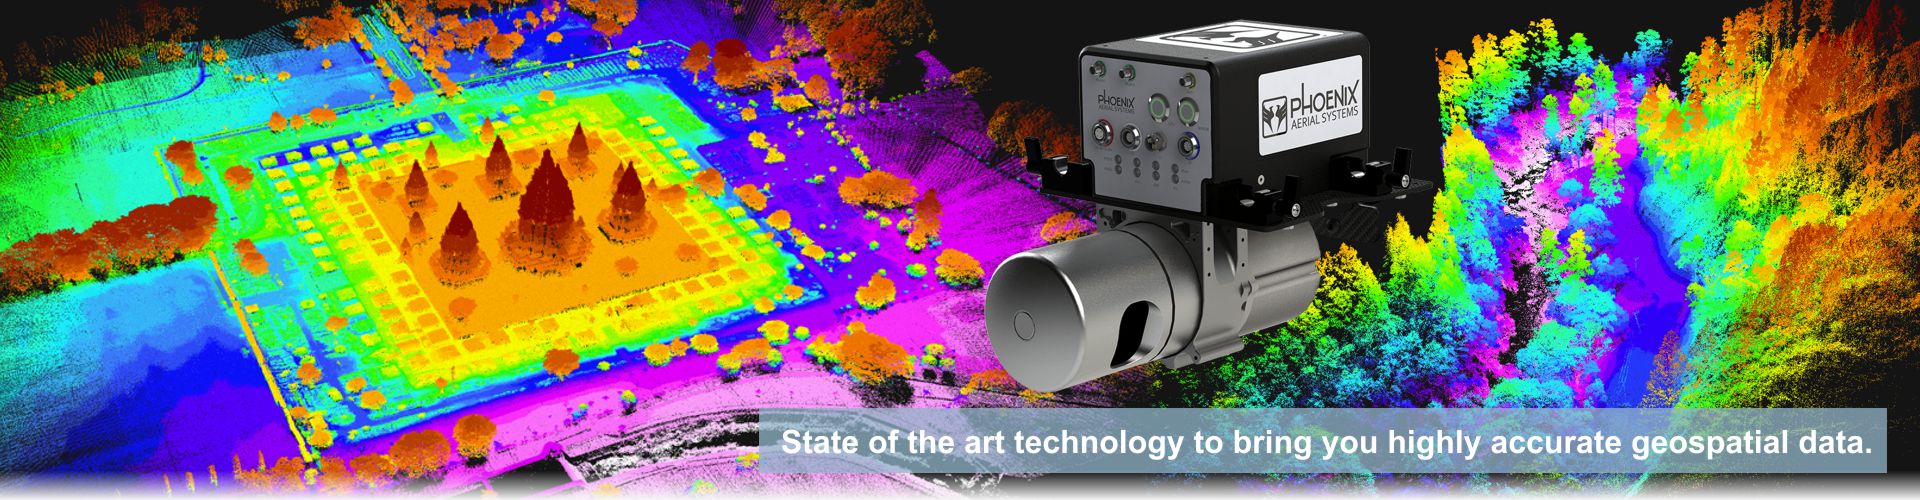 state of the art technology to bring you highly accurate geospatial data